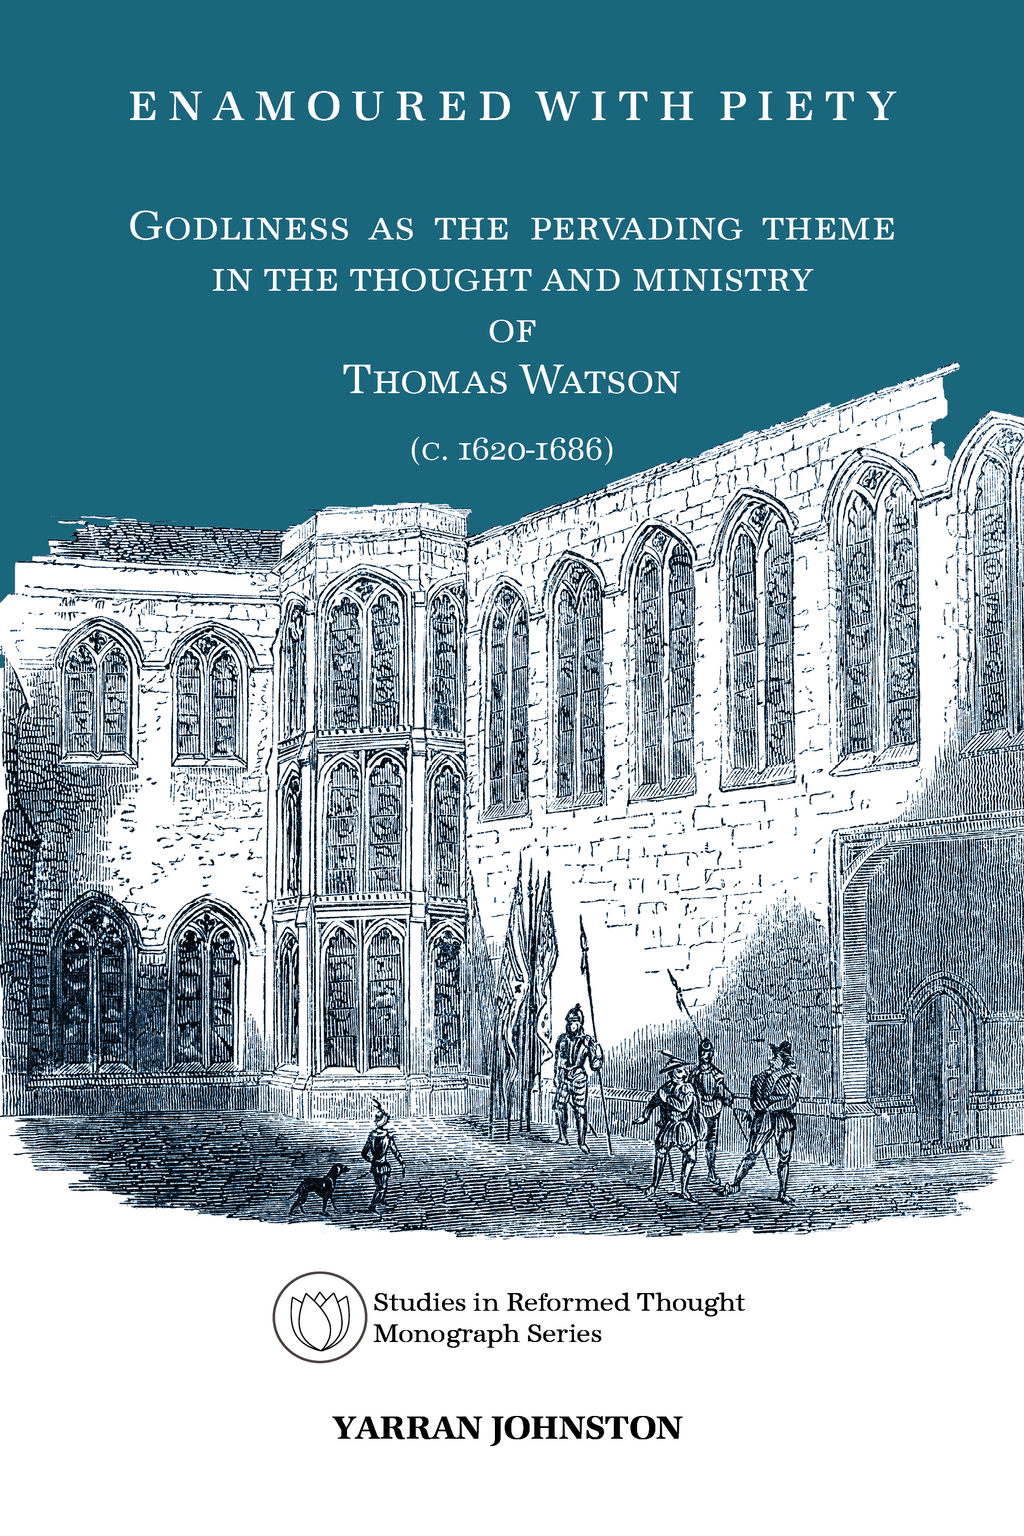 Enamoured with Piety: Godliness as the Pervading Theme in the Thought and Ministry of Thomas Watson